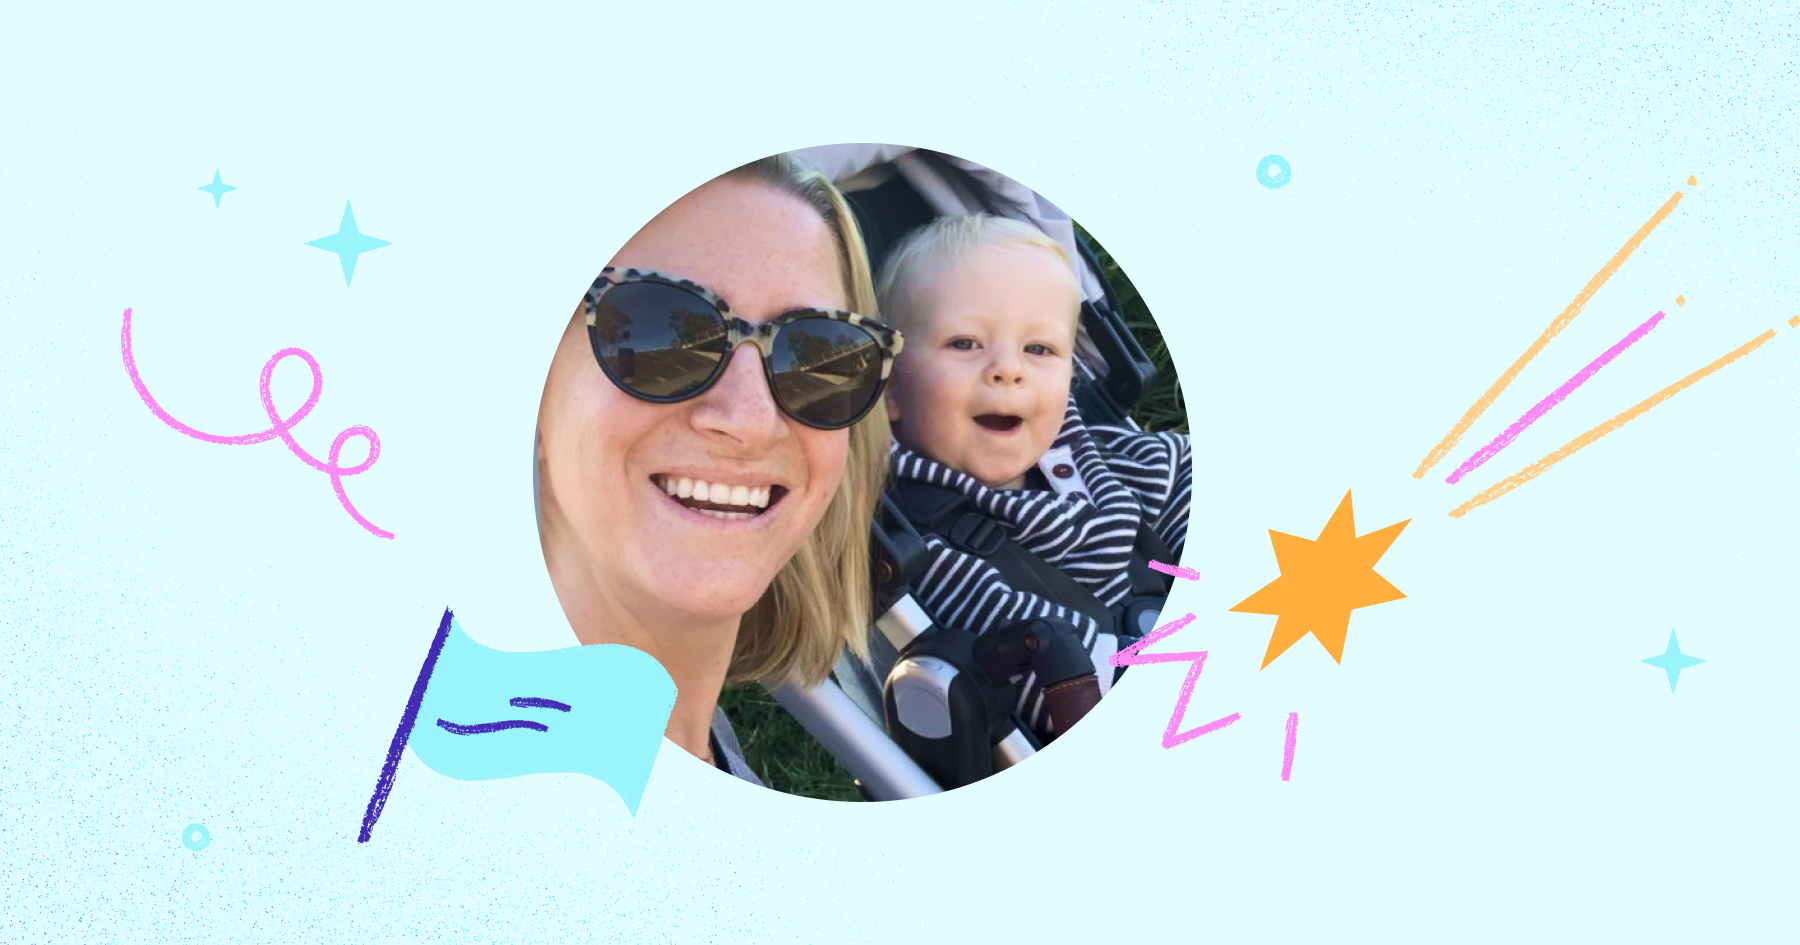 Our Head of Customer Success Jordan and her son, Leo.